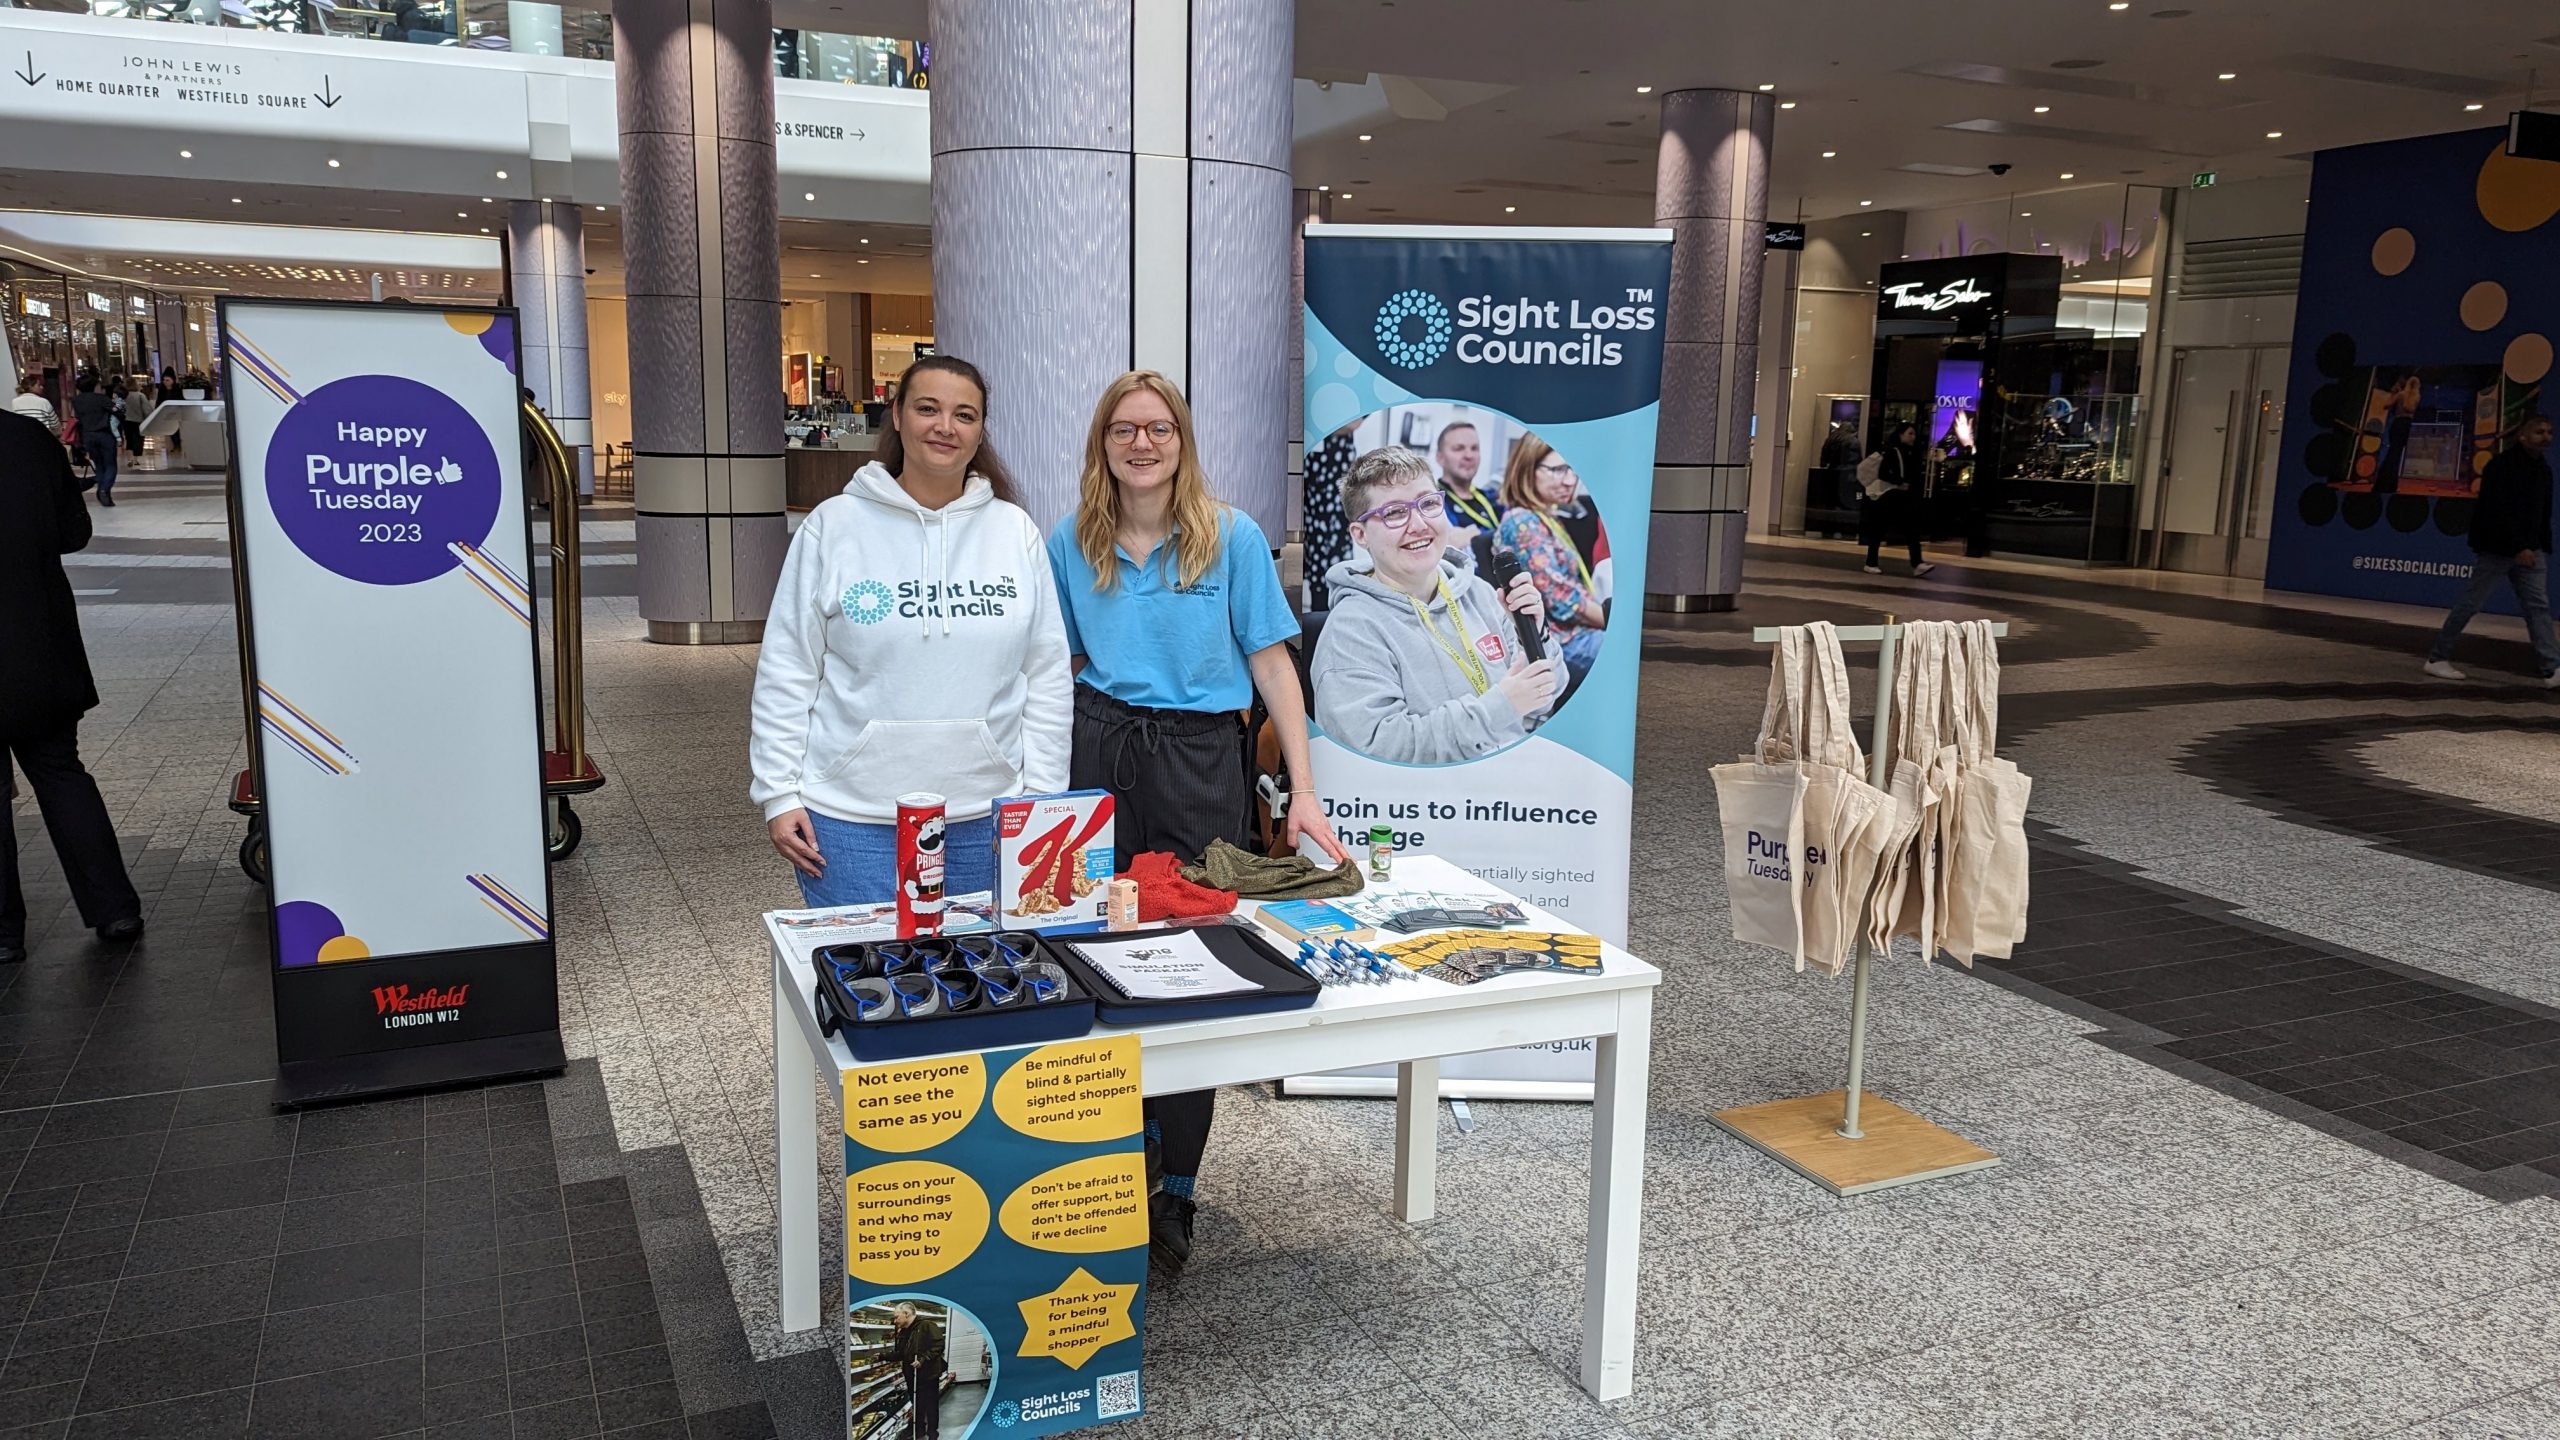 Nikki Hughes, SW London SLC member, and Lucy WIlliams, Senior Engagement Manager for South England, stood at their table in Westfield London. To the left is a Purple Tuesday 2023 banner, and to the right is the Sight Loss Councils banner. On the table are various products, a case with sim specs in it, and the 'Mindful shopper' poster.